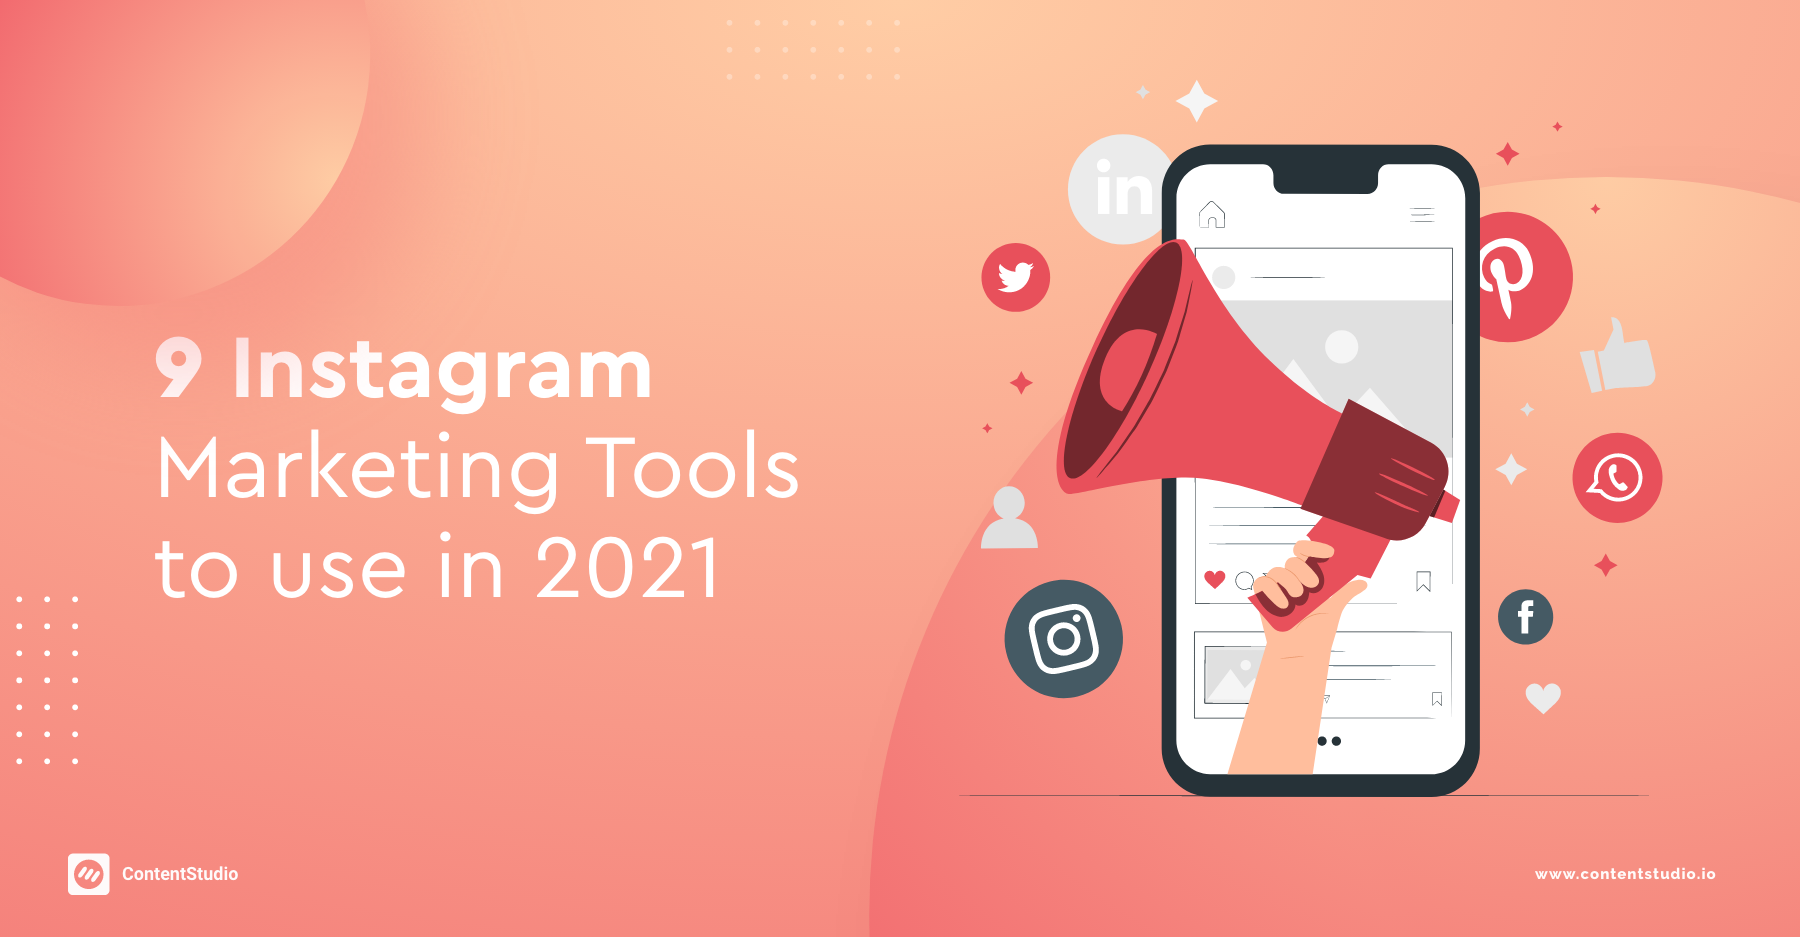 9 instagram marketing tools to use in 2021